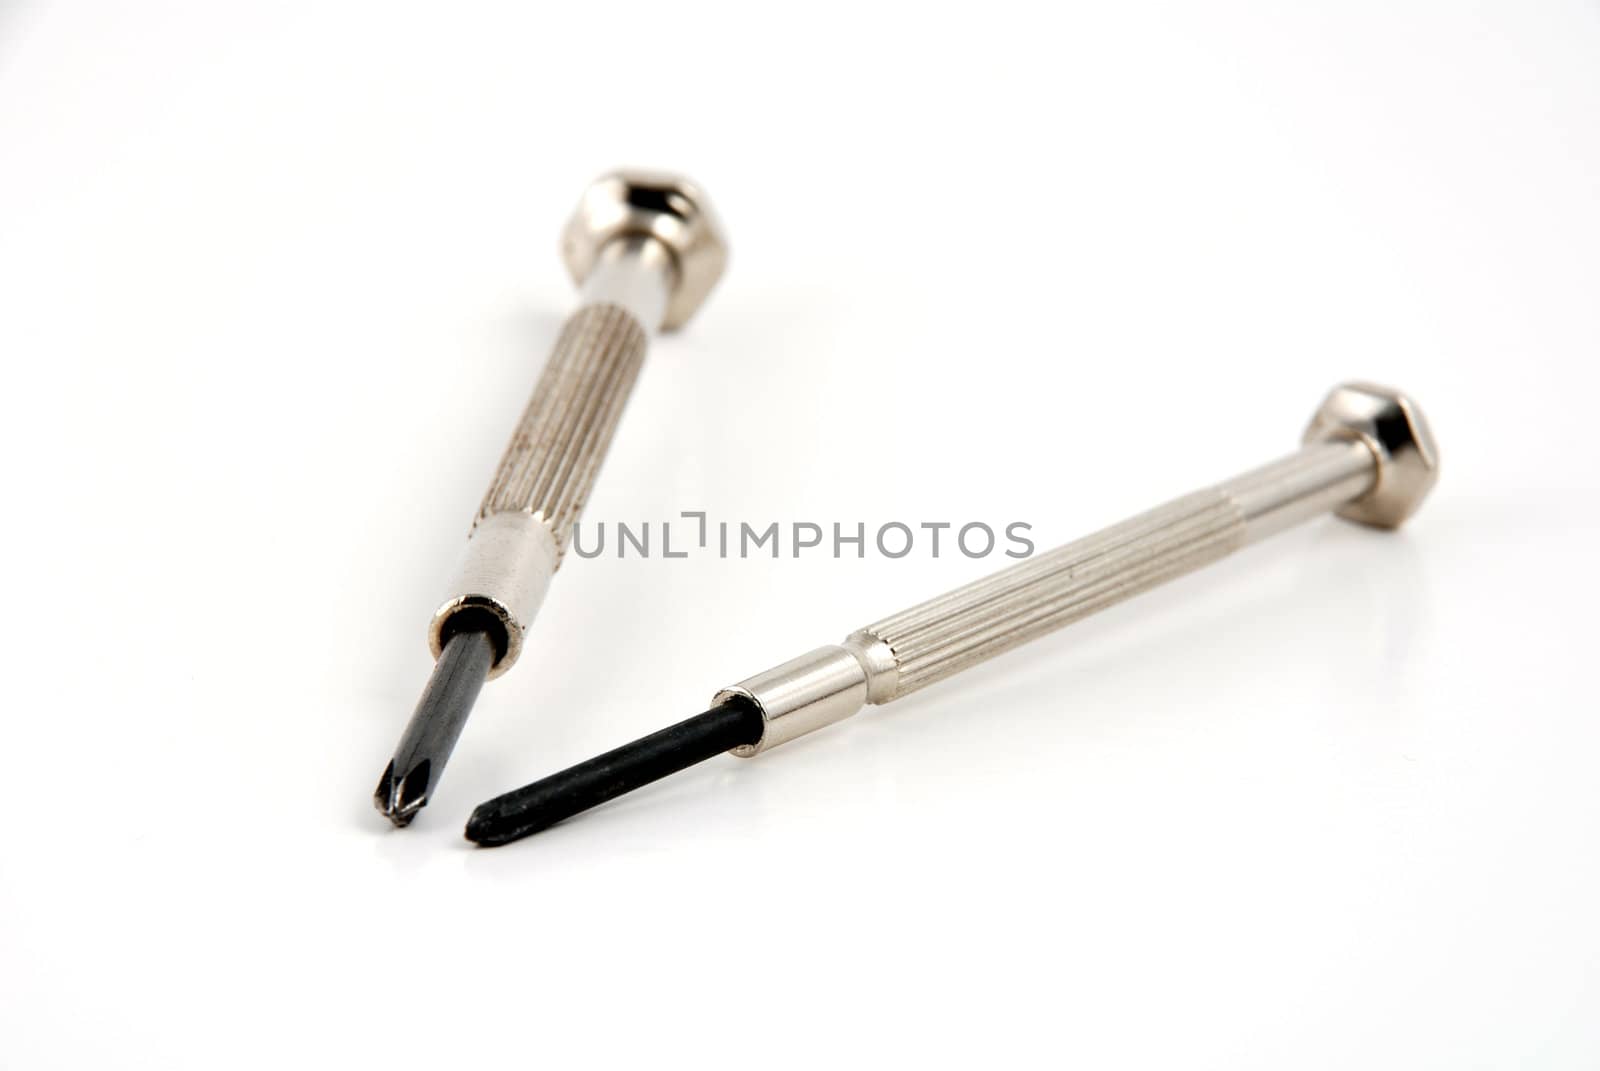 Pictures of small screwdrivers used for precission work